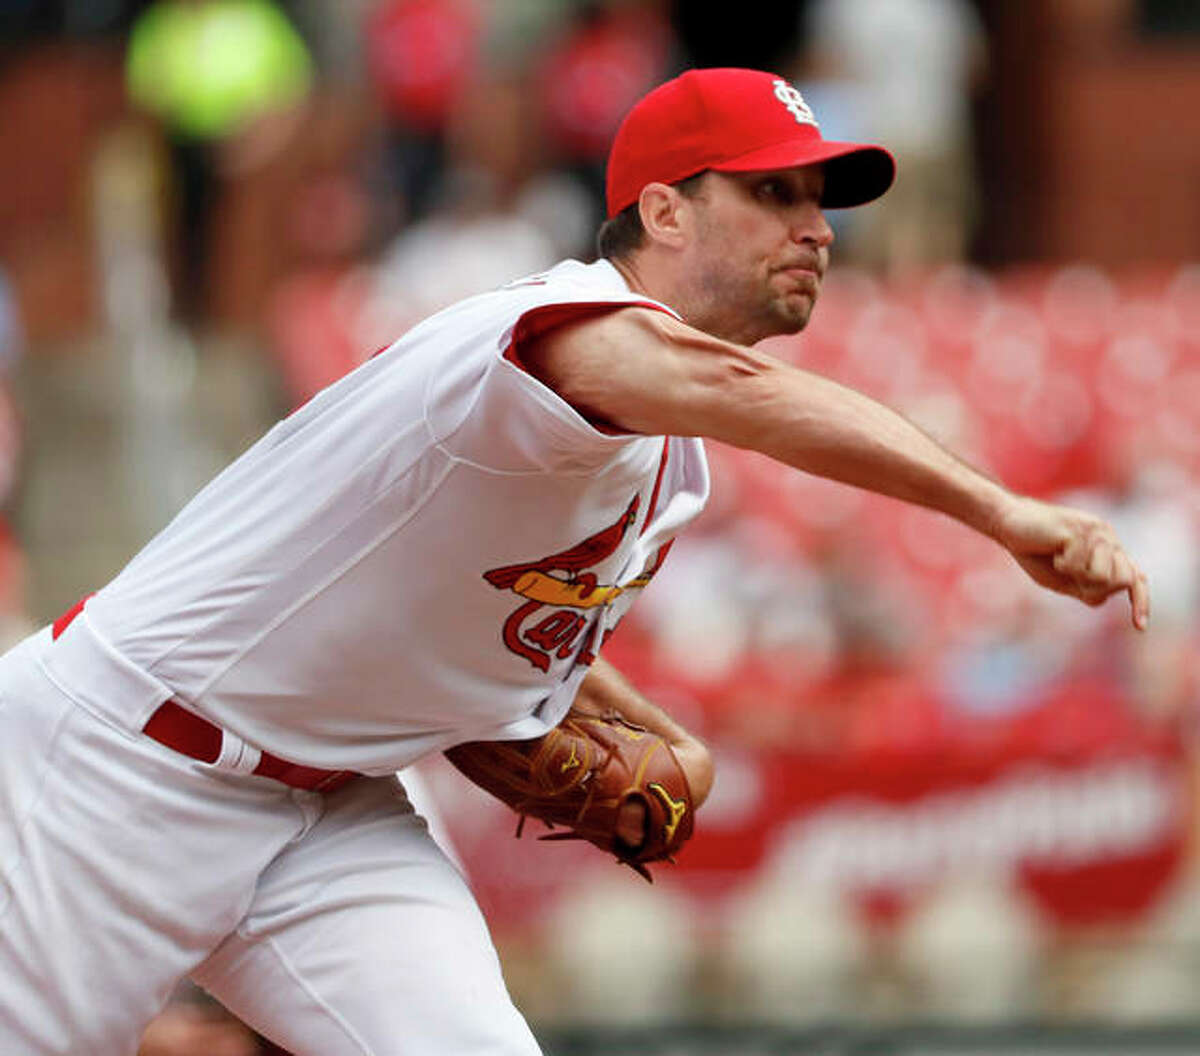 Cardinals pitcher Adam Wainwright throws during the fourth inning against the San Francisco Giants on Monday in St. Louis.